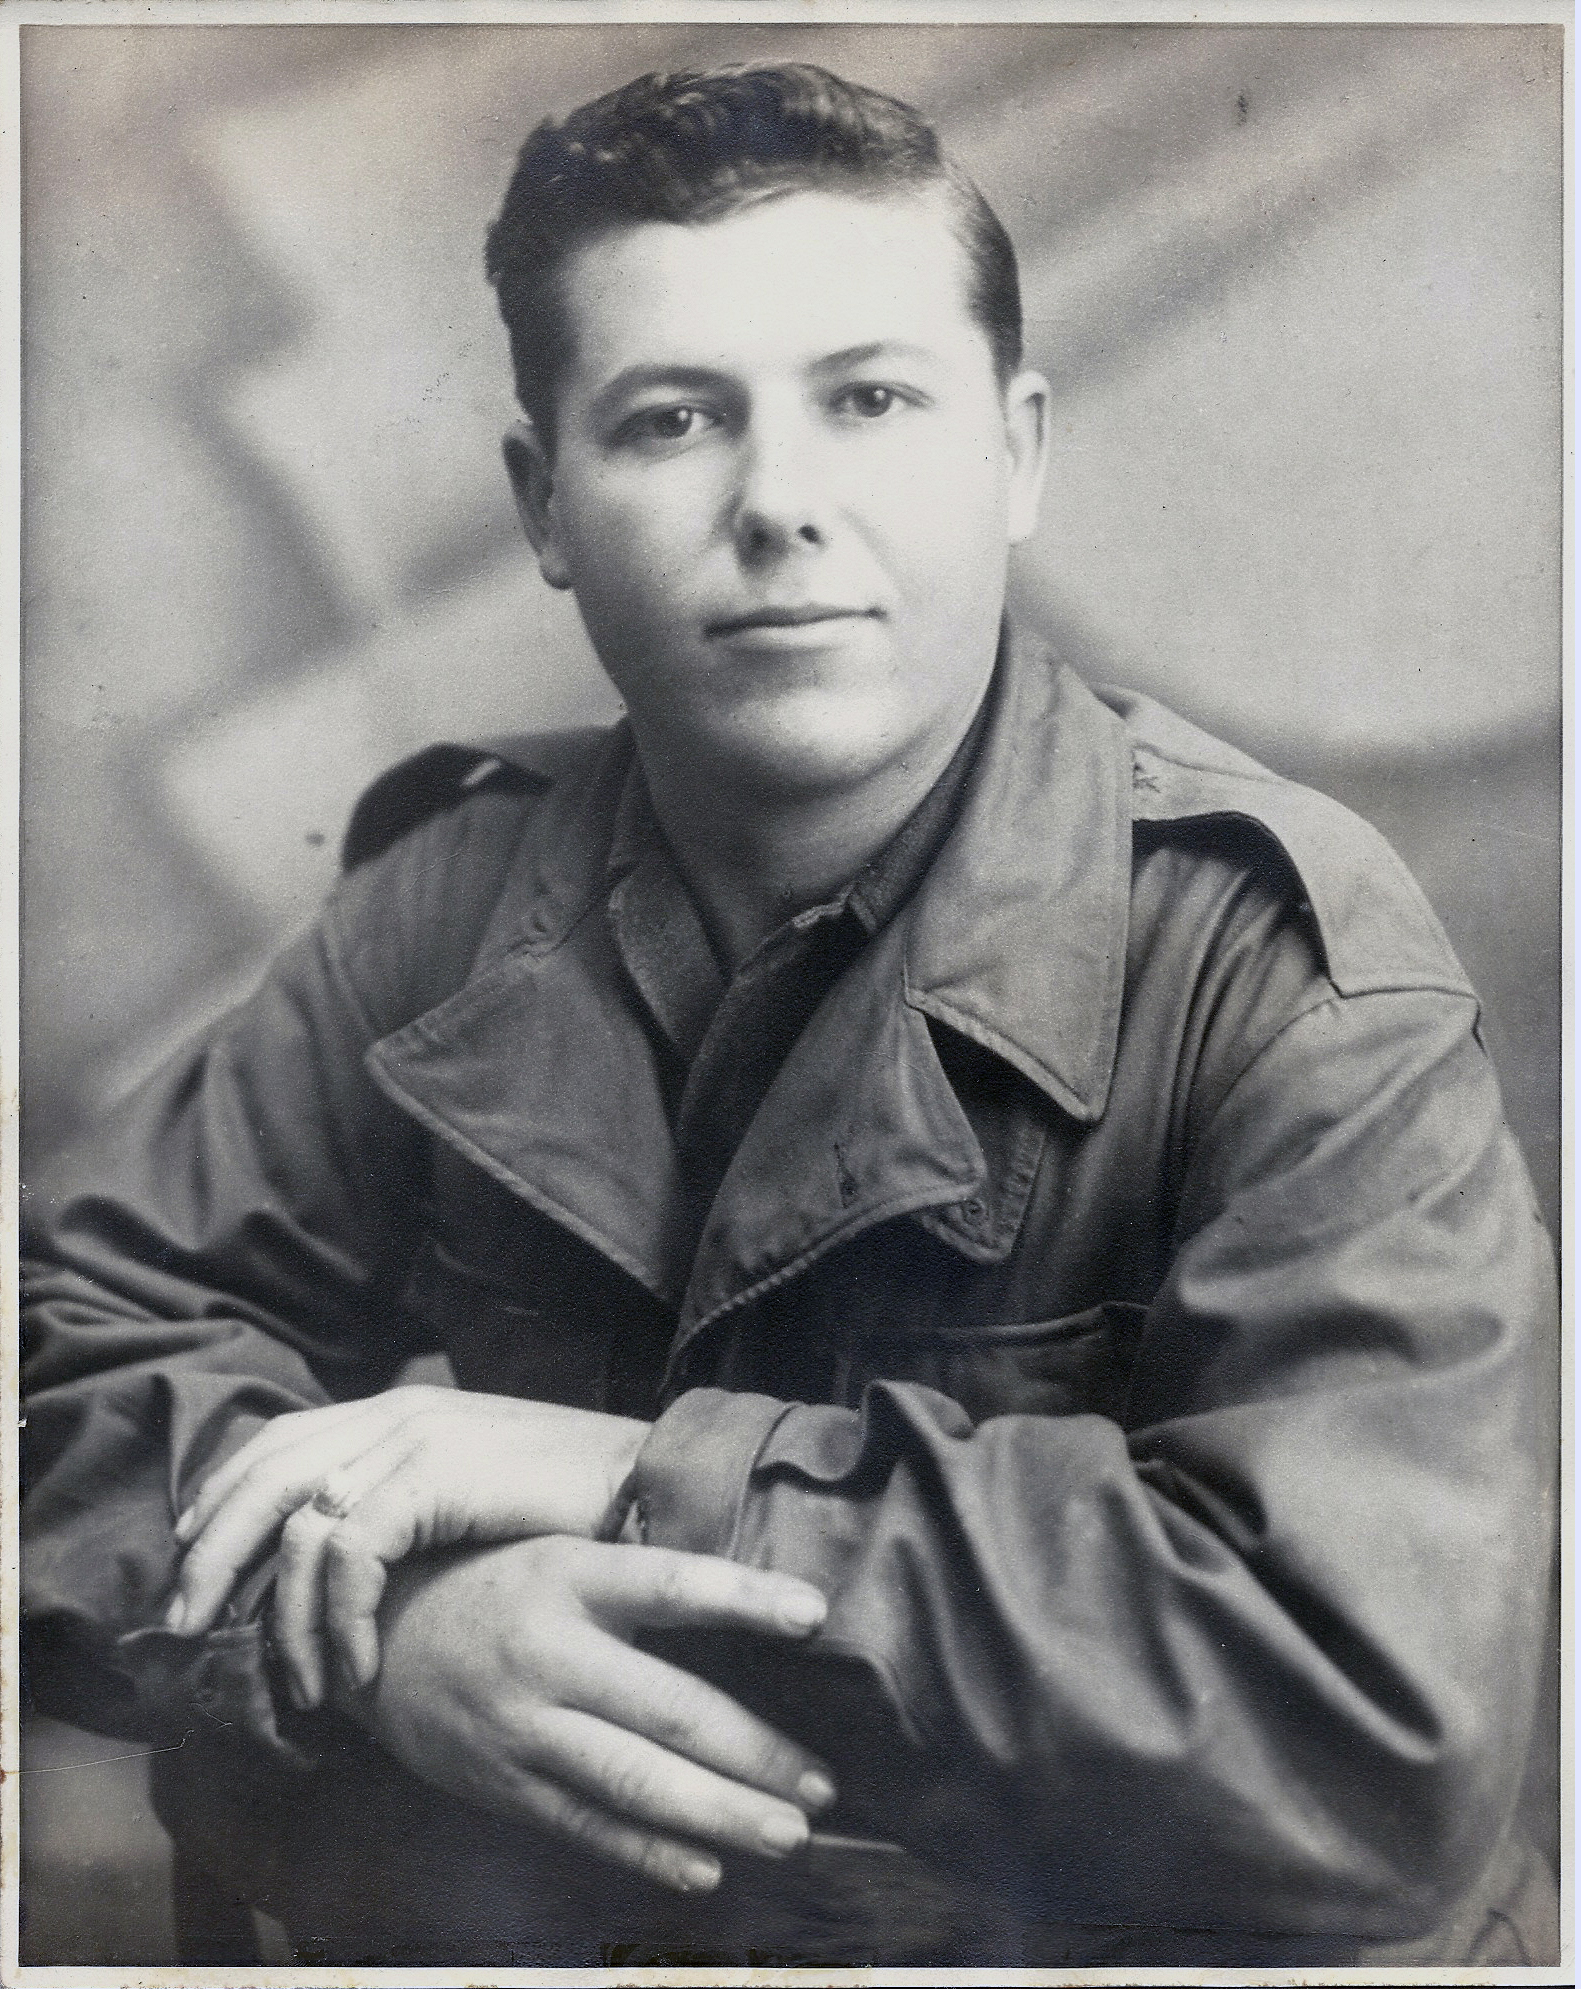 George Robert Blalack, US Army, killed during WWII